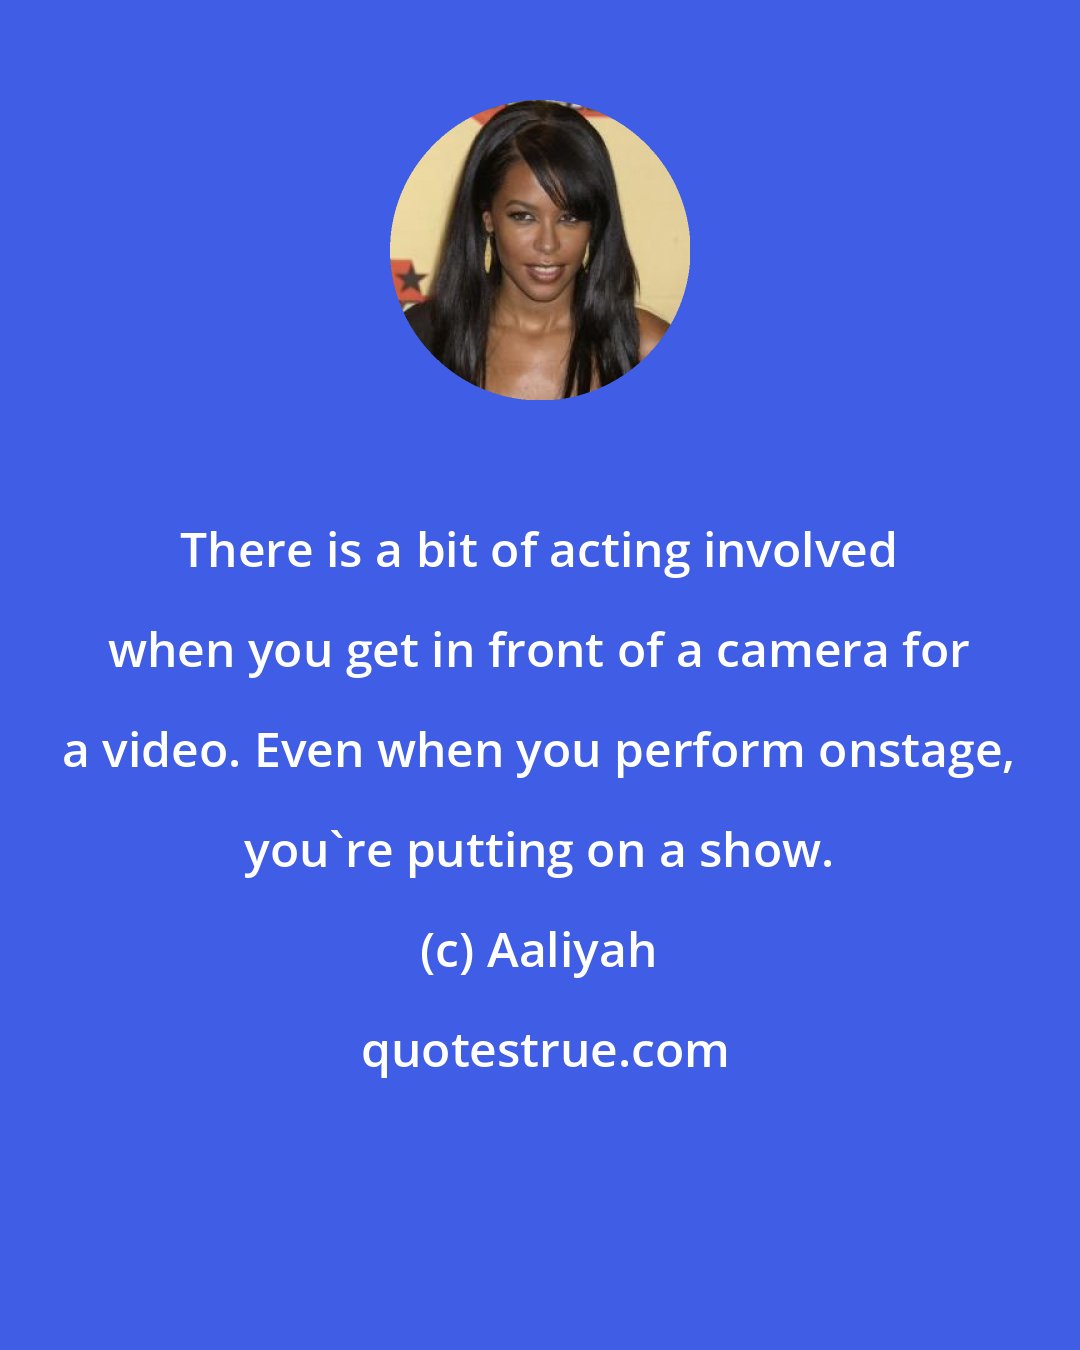 Aaliyah: There is a bit of acting involved when you get in front of a camera for a video. Even when you perform onstage, you're putting on a show.